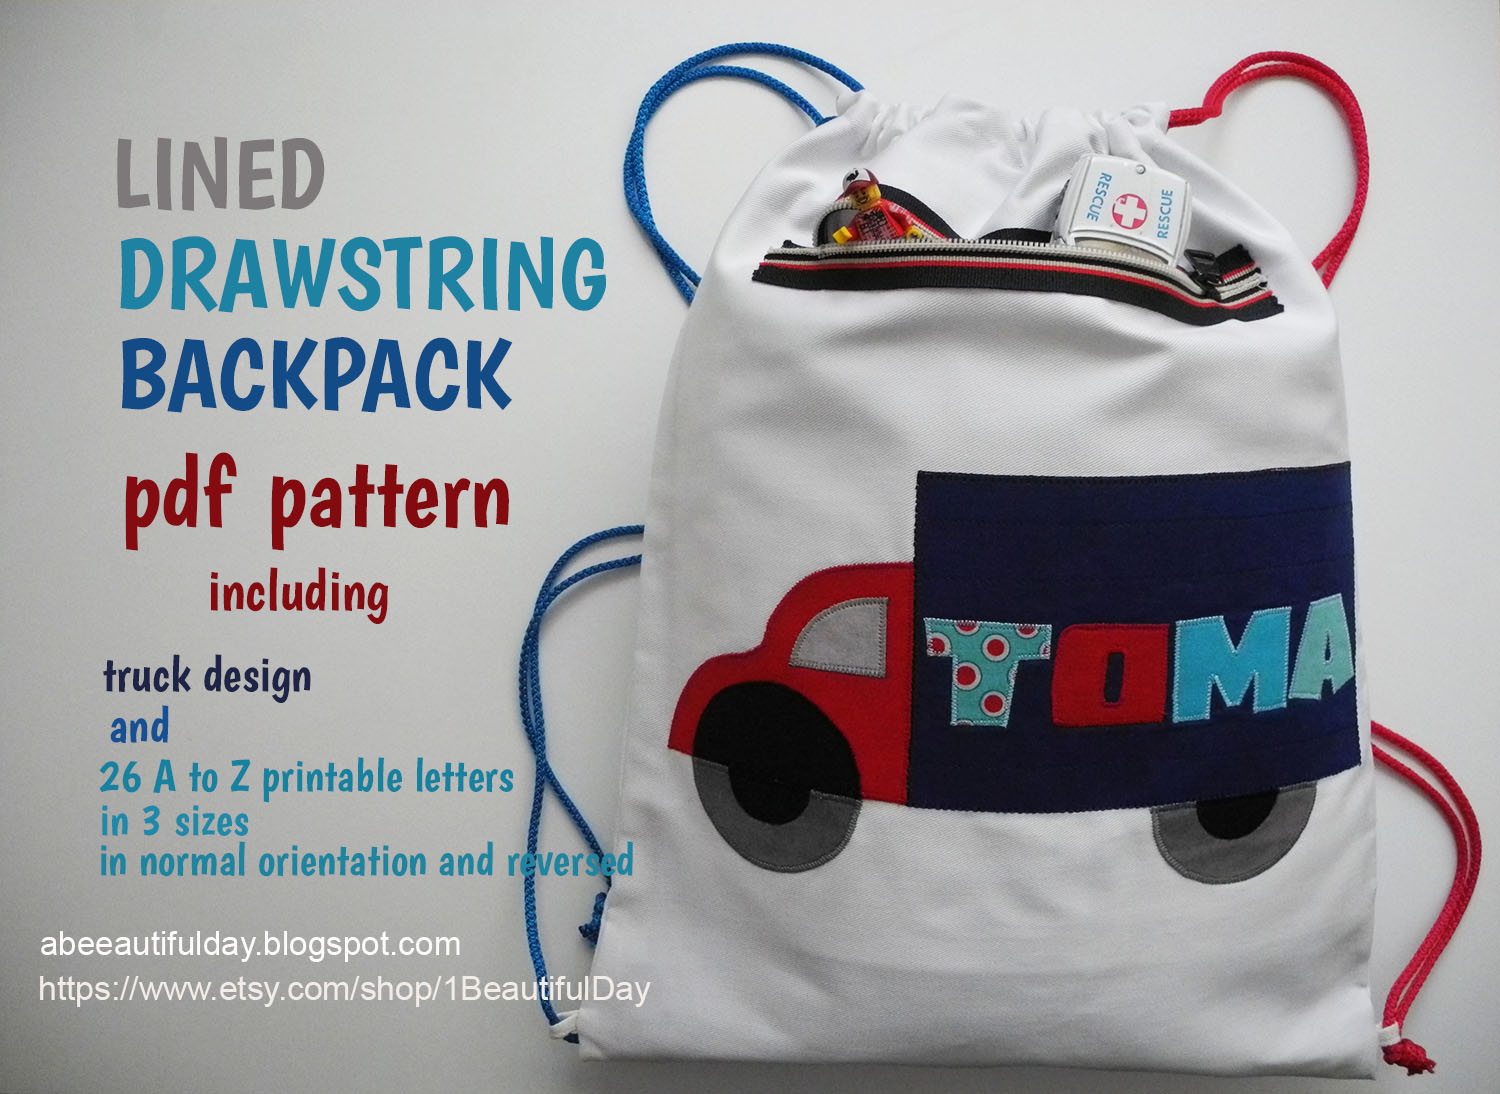 A Beautiful Day Lined Drawstring Backpack Pattern Is Here 